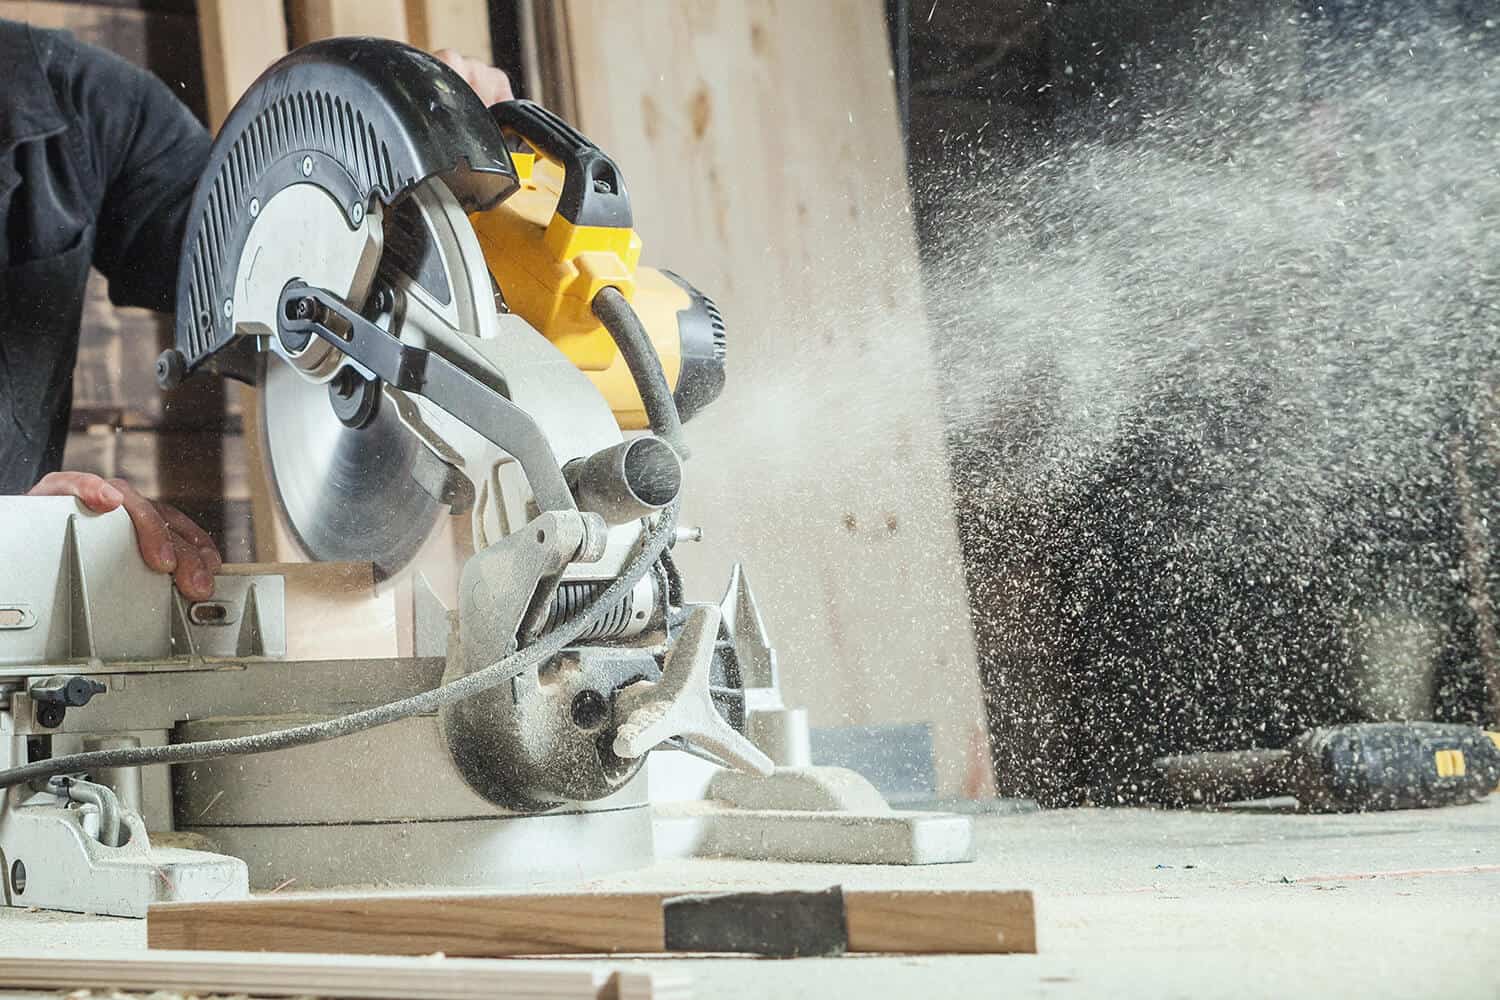 What Makes The 12” Miter Saw Superior